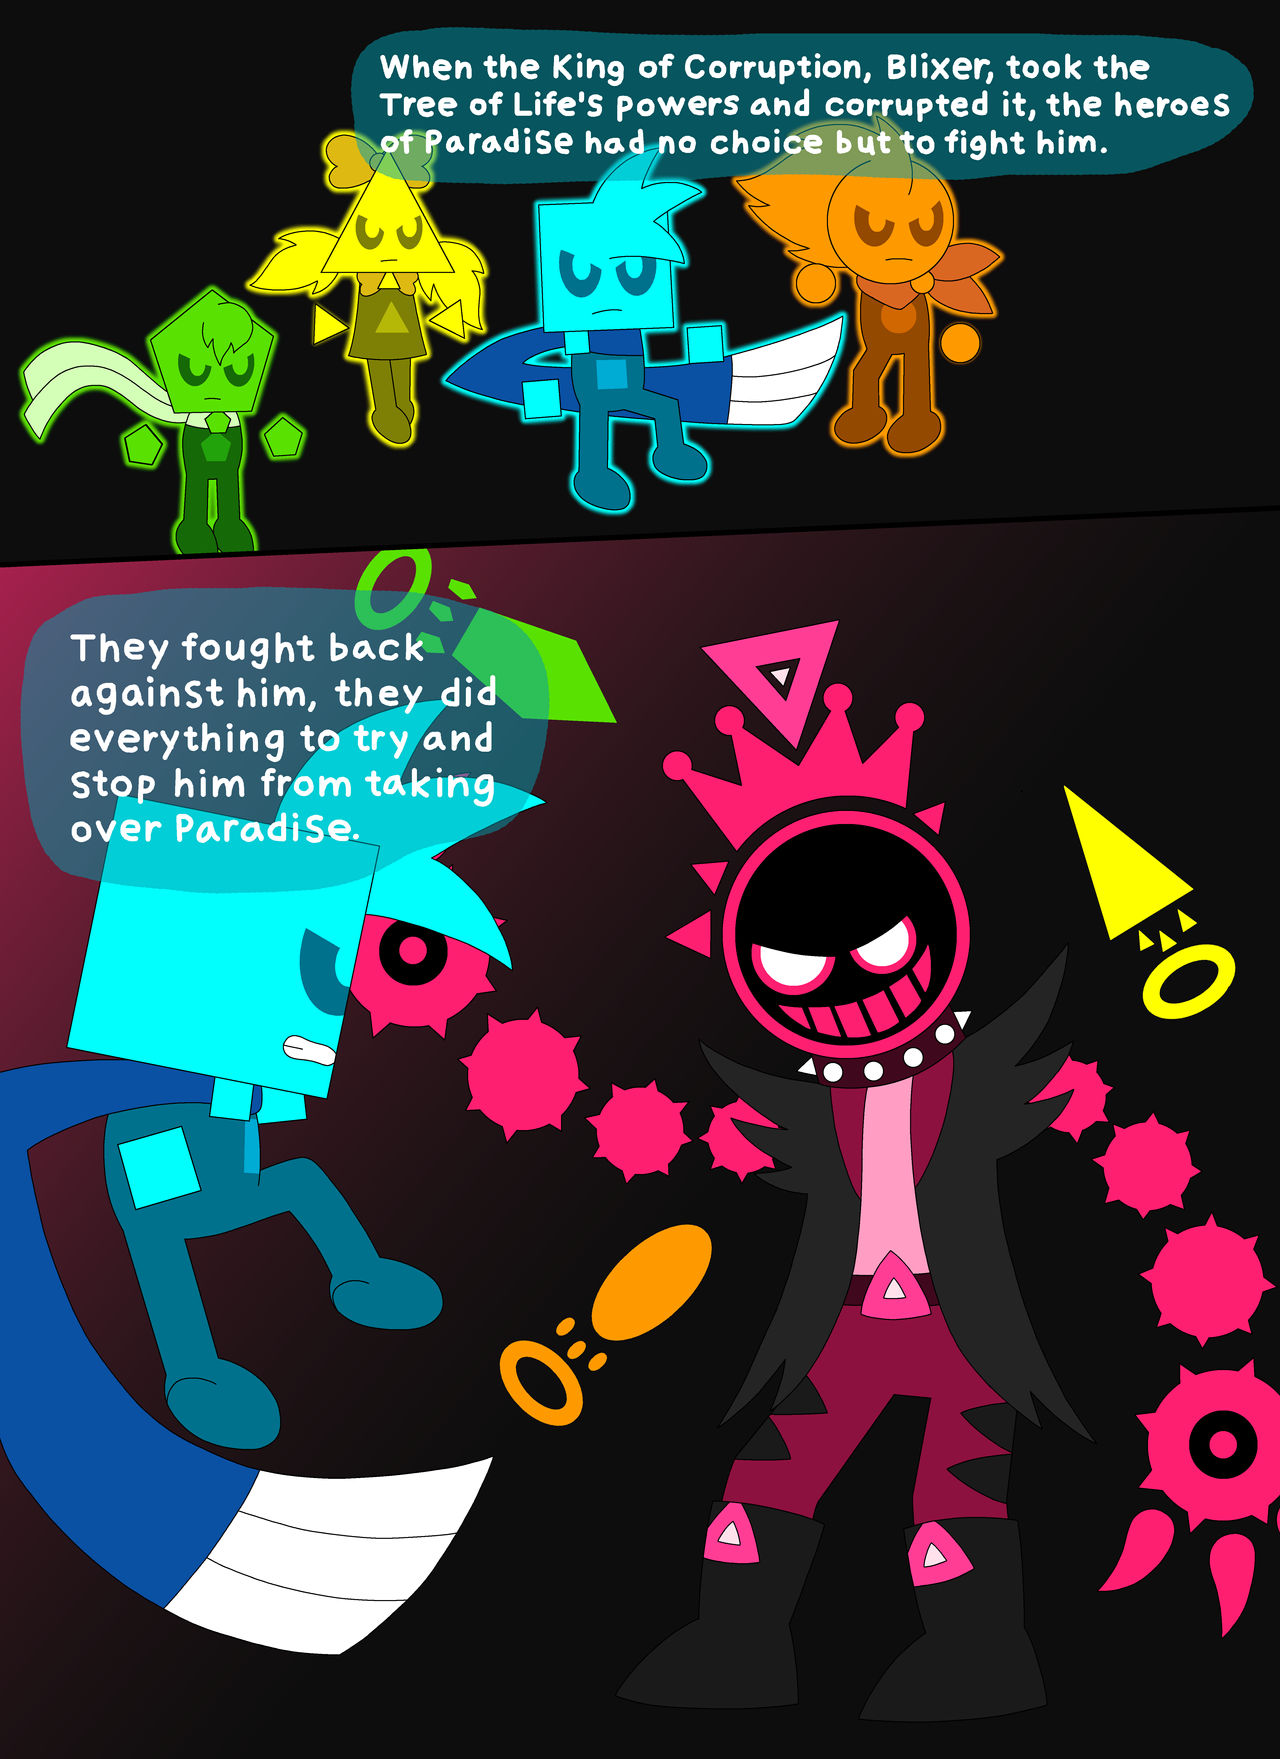 Just Shapes and Beats: The Star Hero page 2 by Linedol on DeviantArt